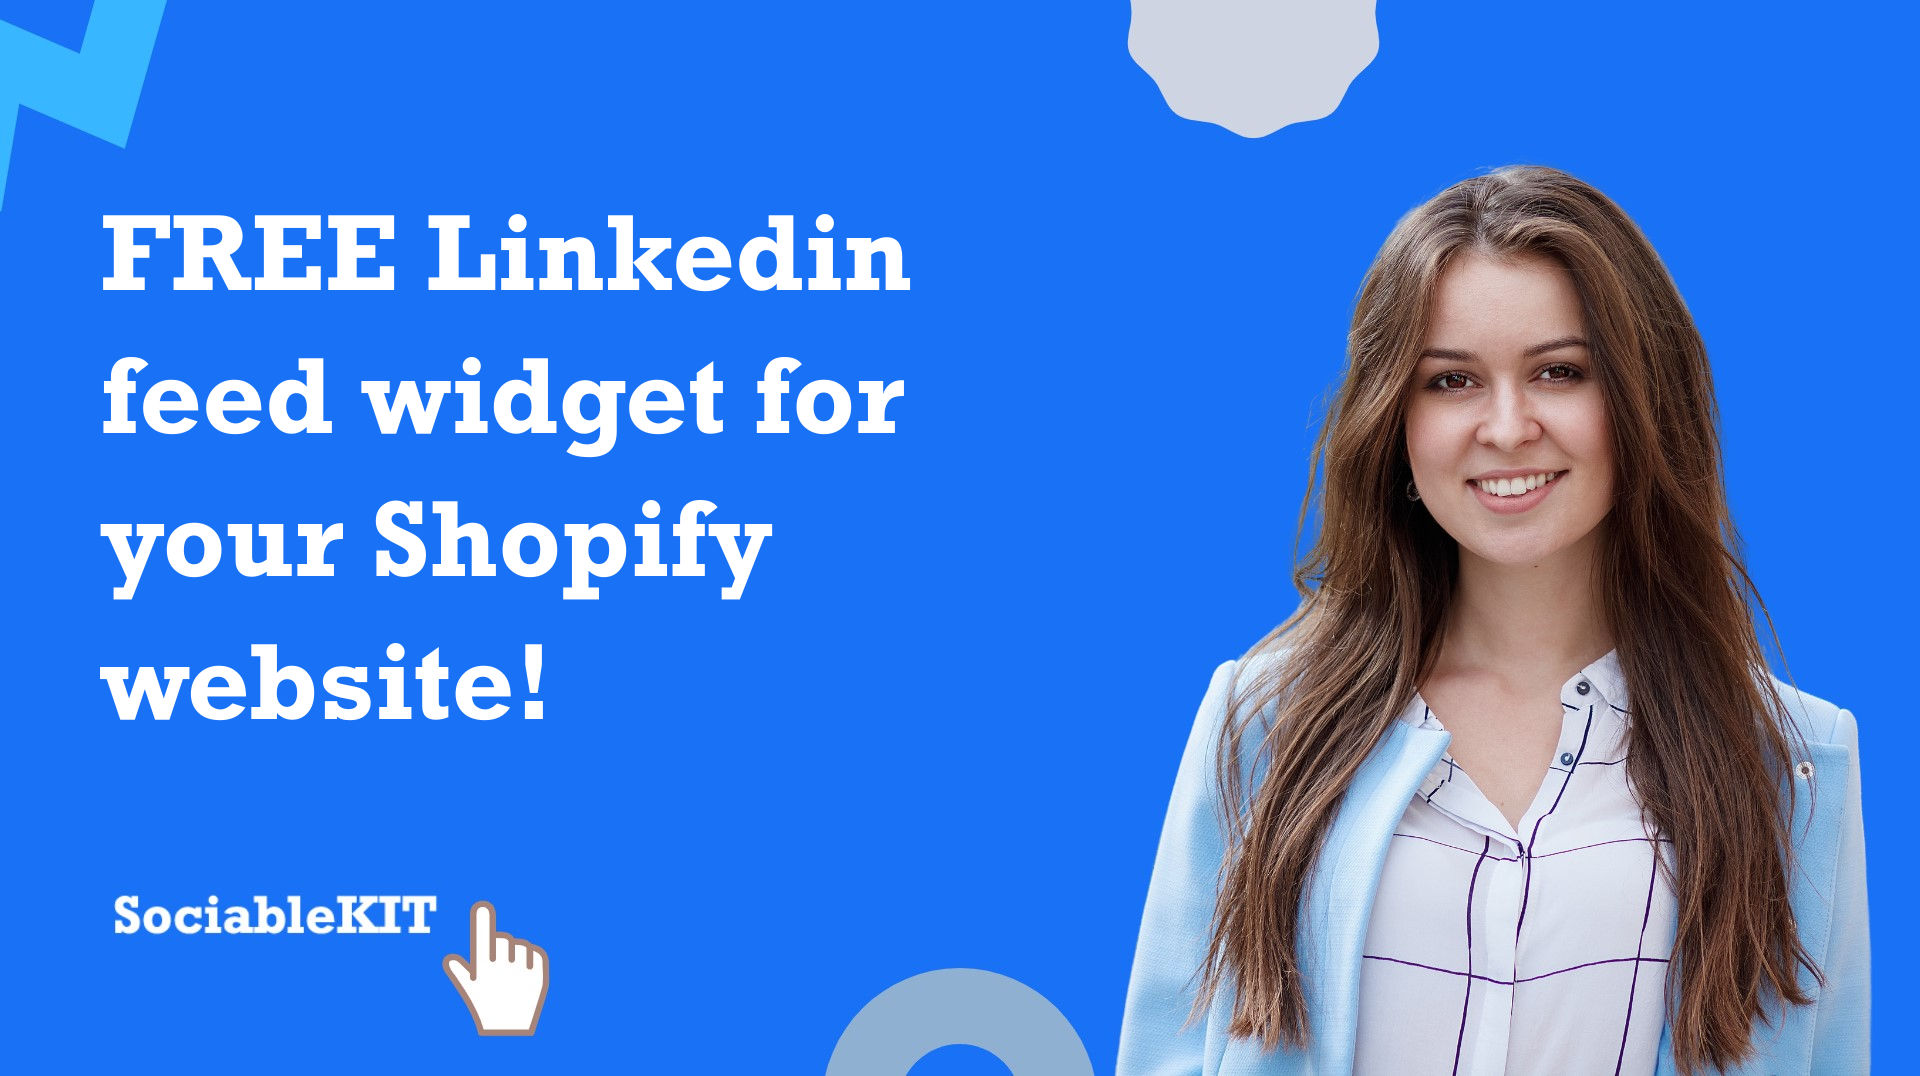 Free Linkedin feed widget for your Shopify website